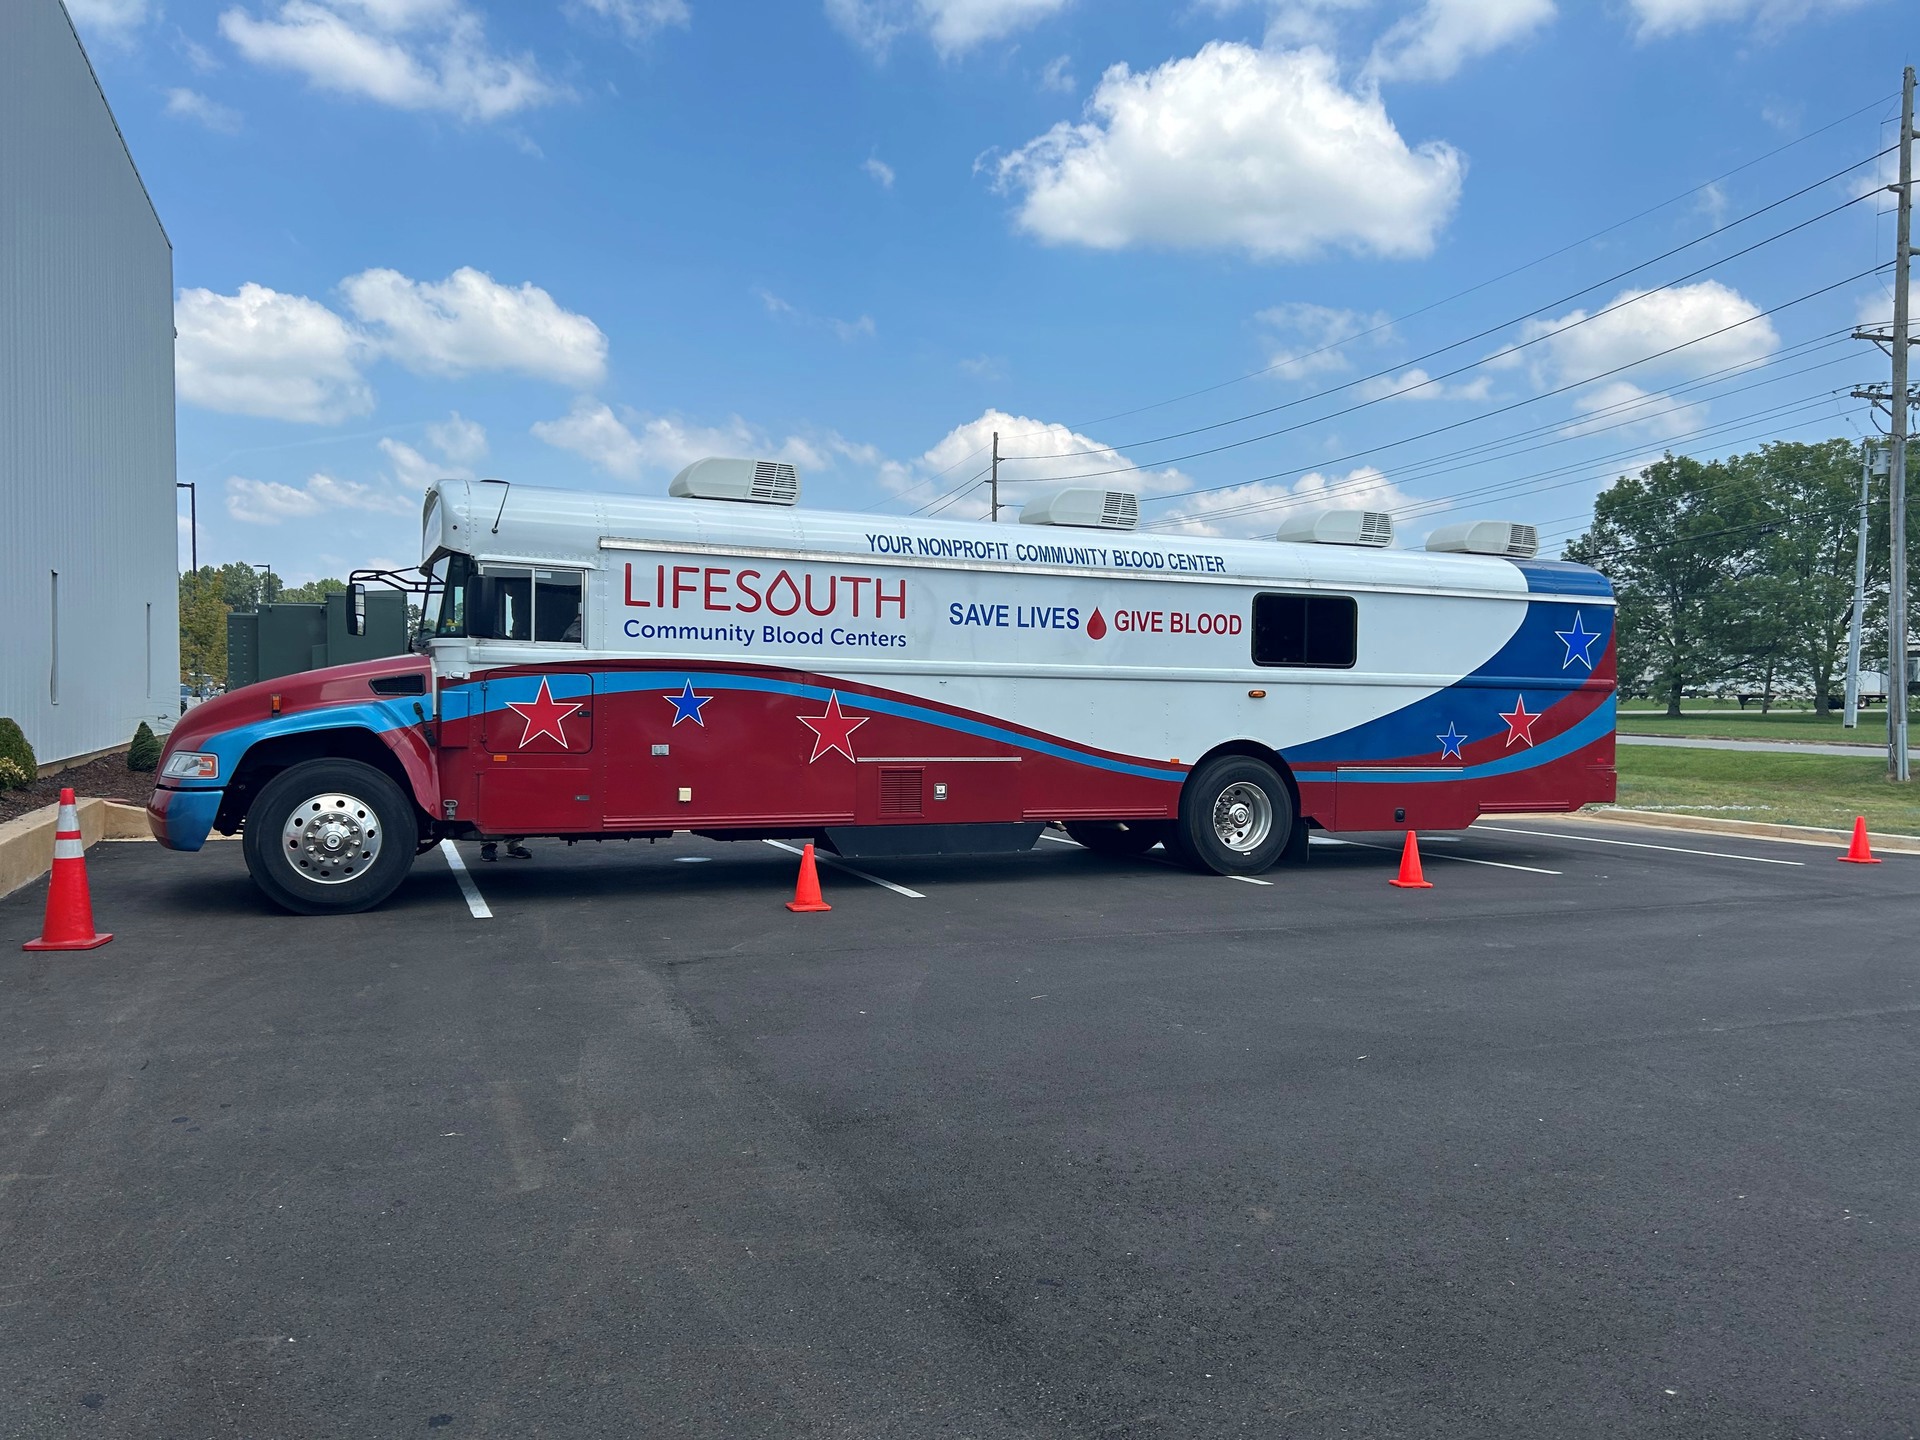 Another blood drive in Athens, AL